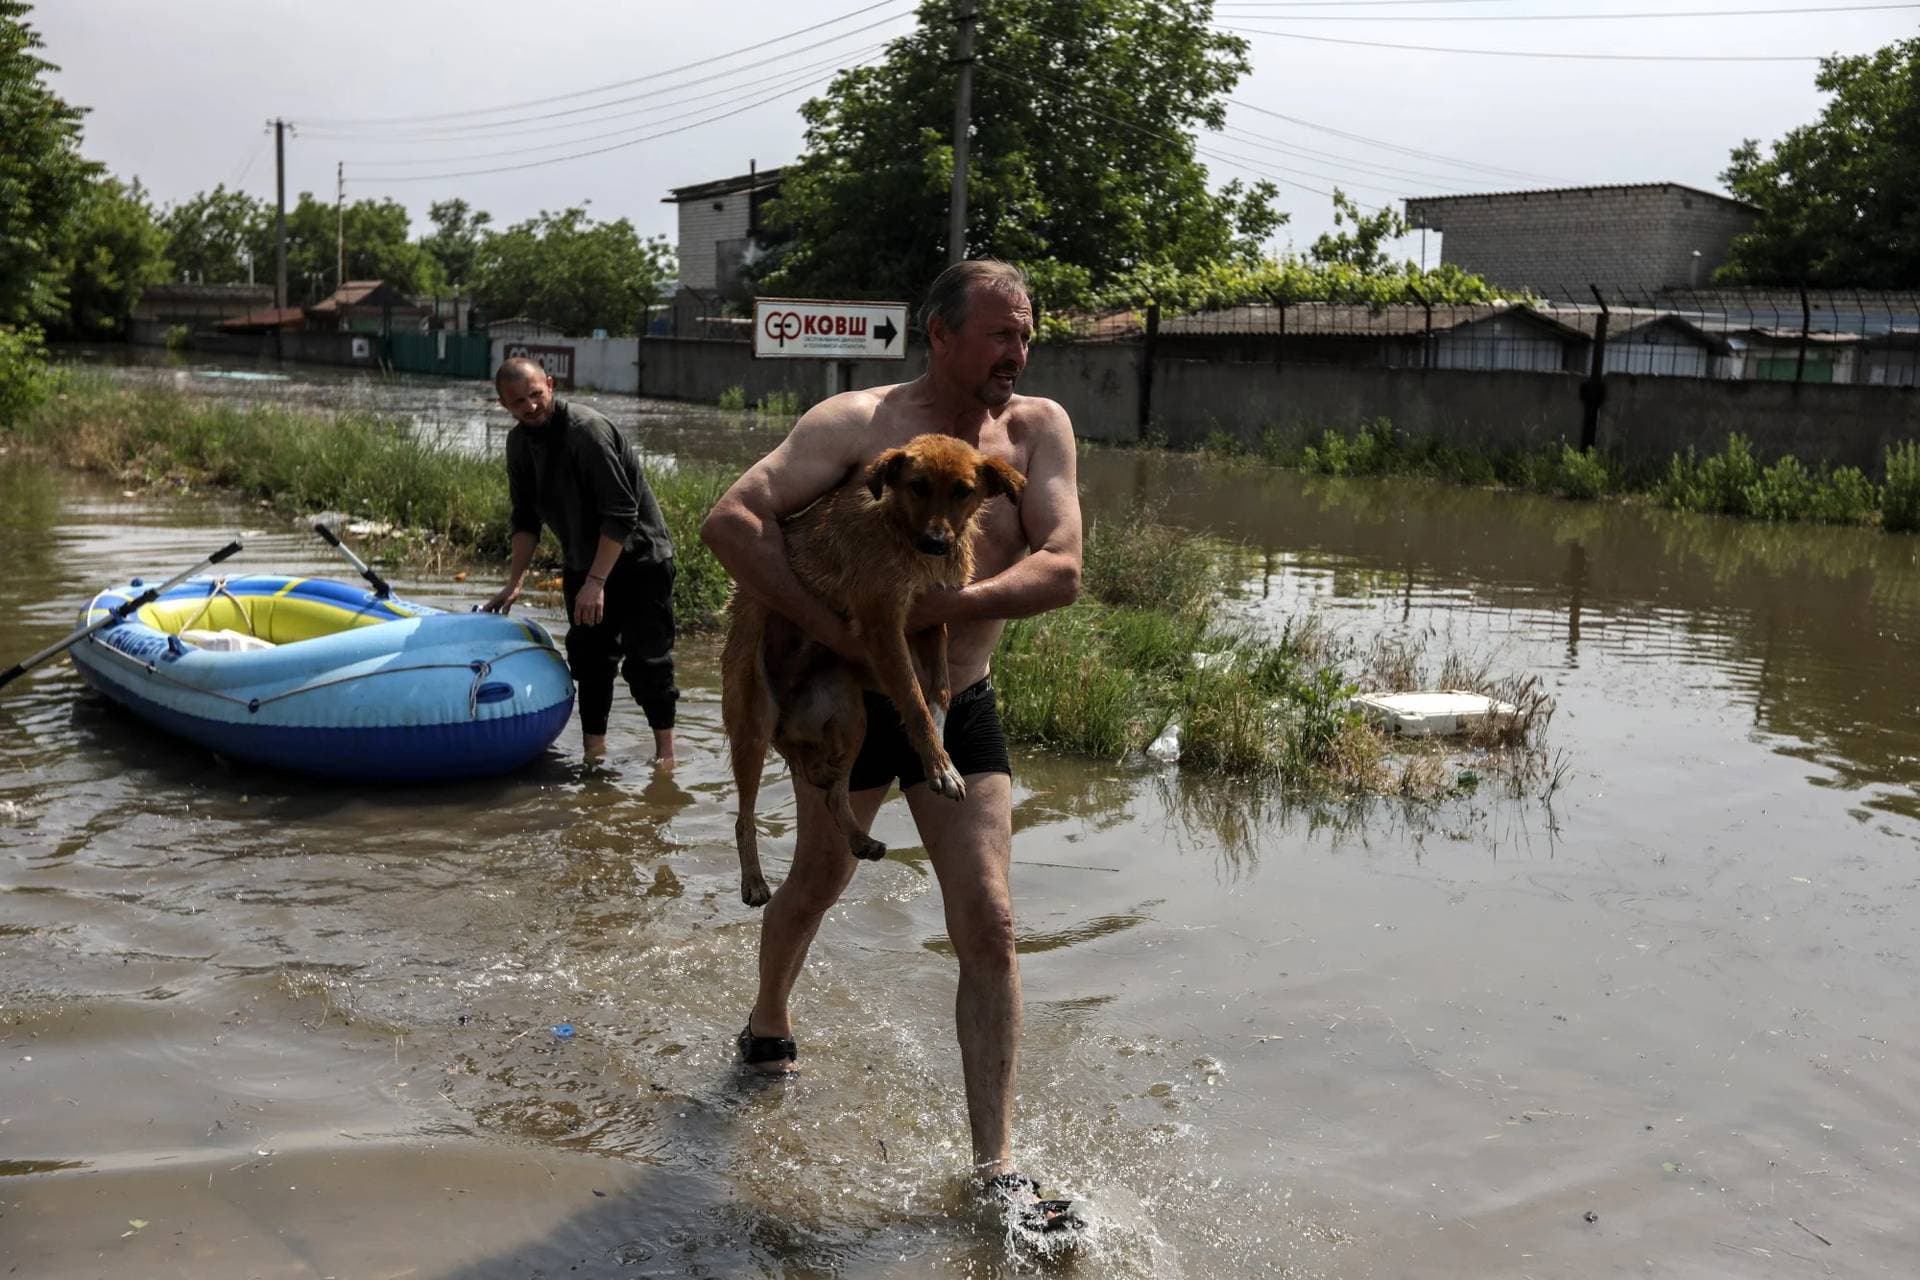 Local residents save animals from a flooded area of Kherson